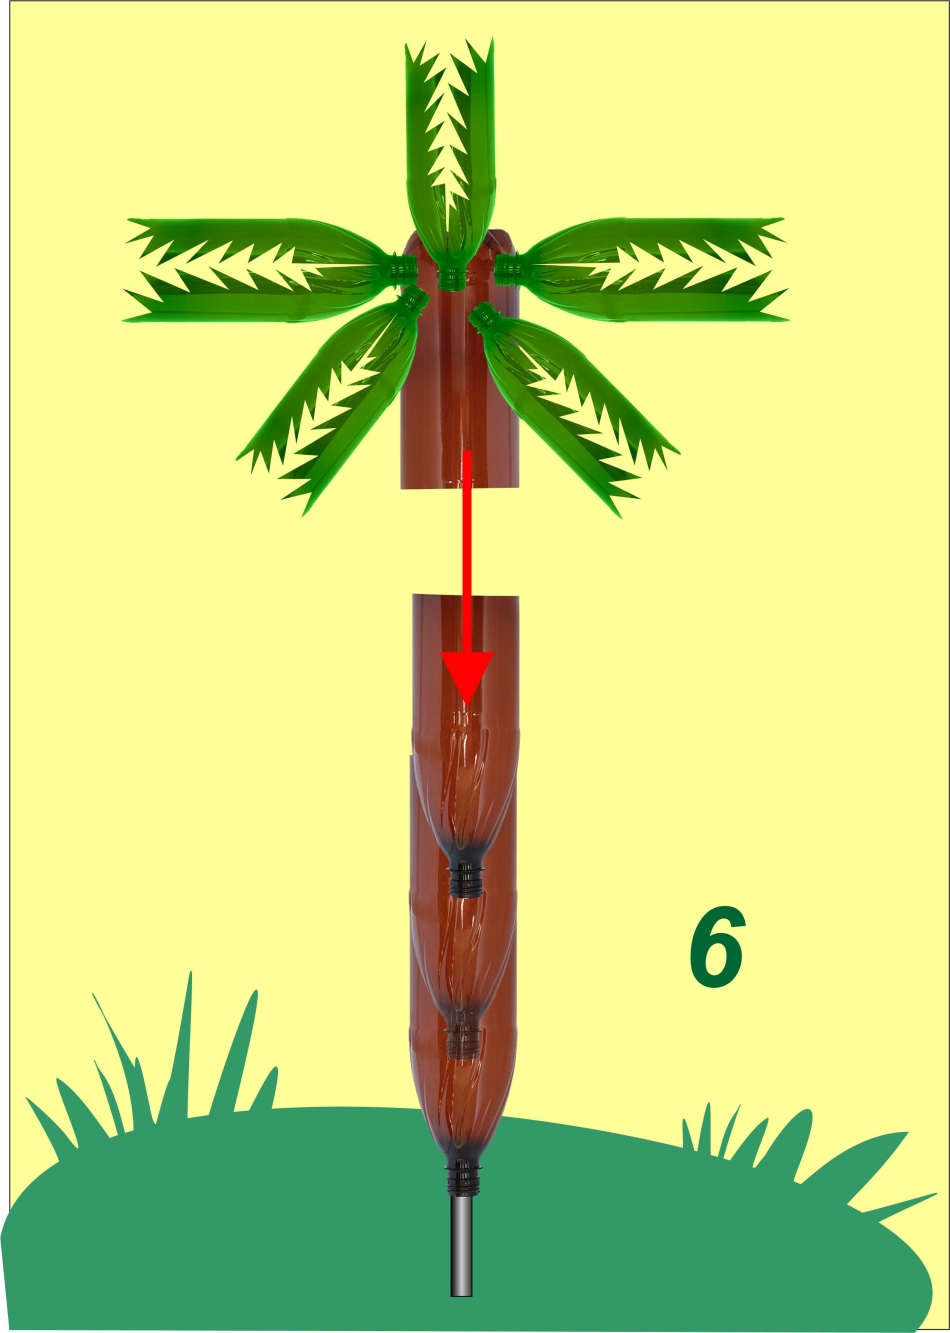 Crohn mounting scheme to the palm barrel from bottles